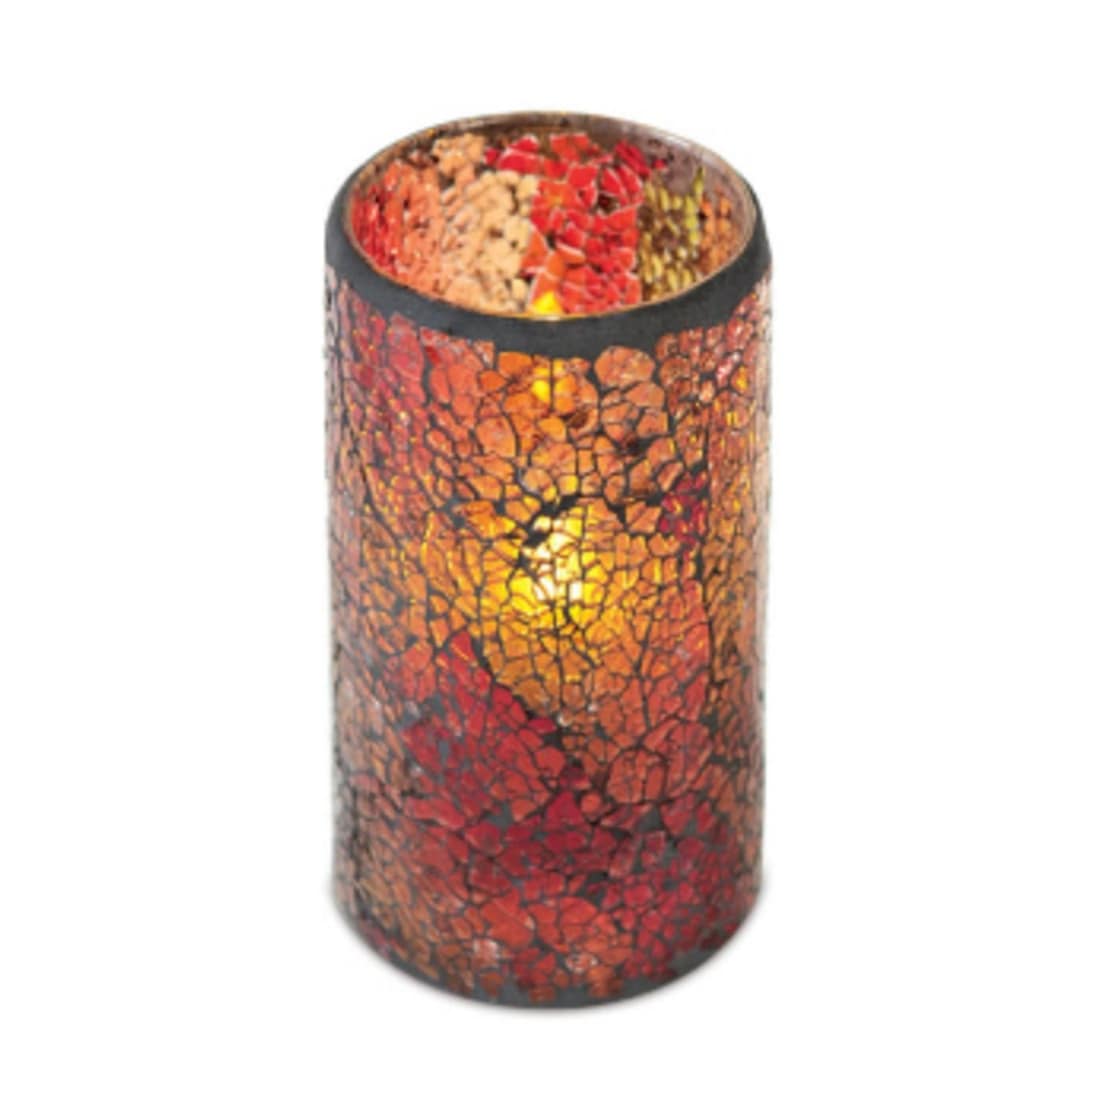 https://ak1.ostkcdn.com/images/products/is/images/direct/7d811b3f5b35b889729d2048b6c9d17bdc9514c2/6-Red-Gold-Orange-Flameless-Wax-Pillar-Candles-in-Glass-Mosiac-Holders-3%22-x-6%22.jpg